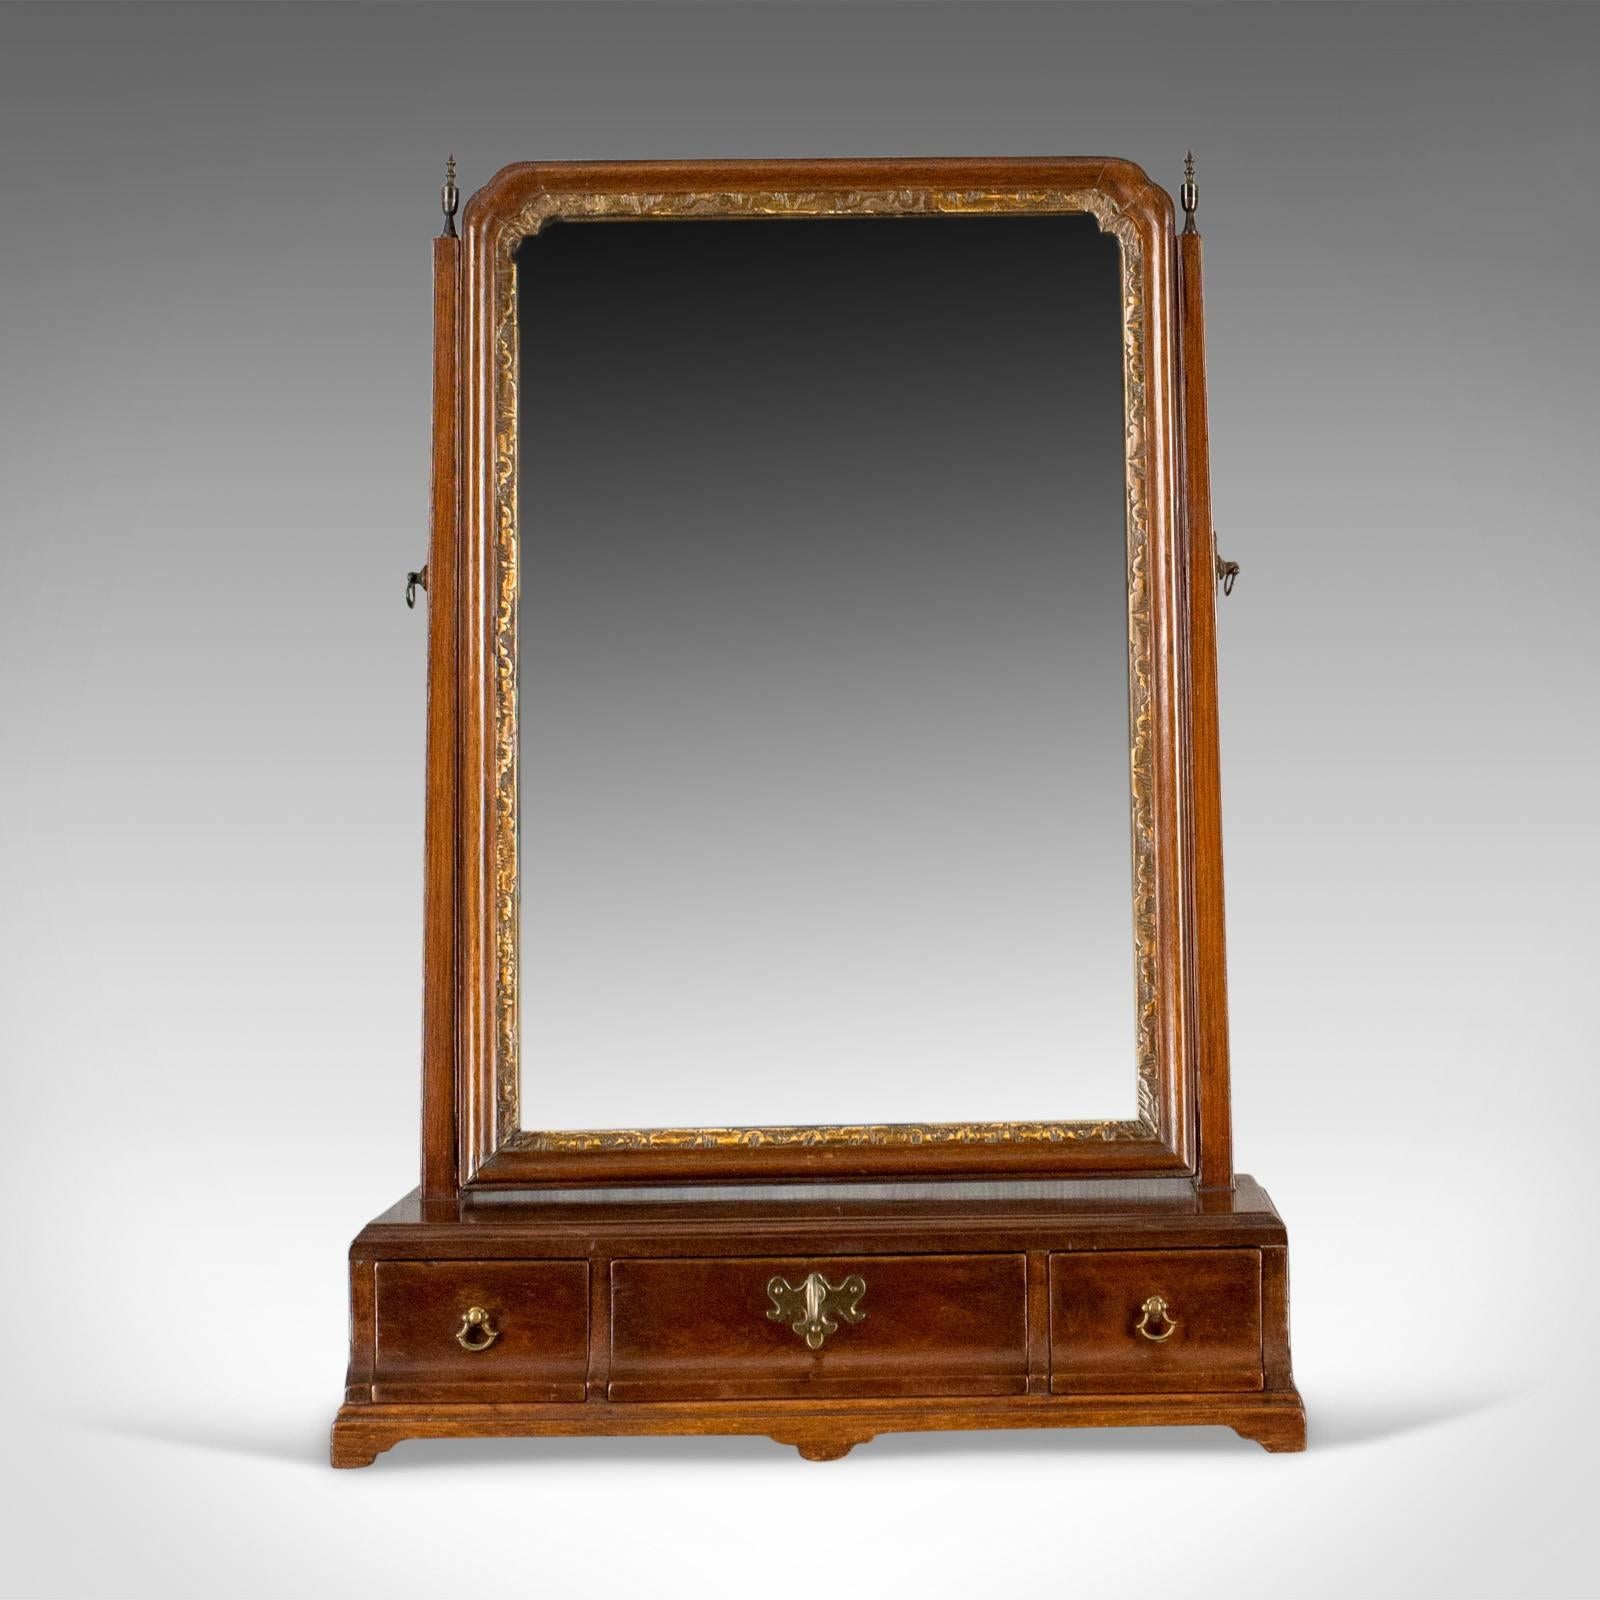 This is an antique dressing table mirror, an English, Georgian, mahogany, toilet or vanity mirror dating to circa 1800.

A delightful dressing table vanity mirror
The mahogany frame displaying good colour throughout
The original mirror plate in